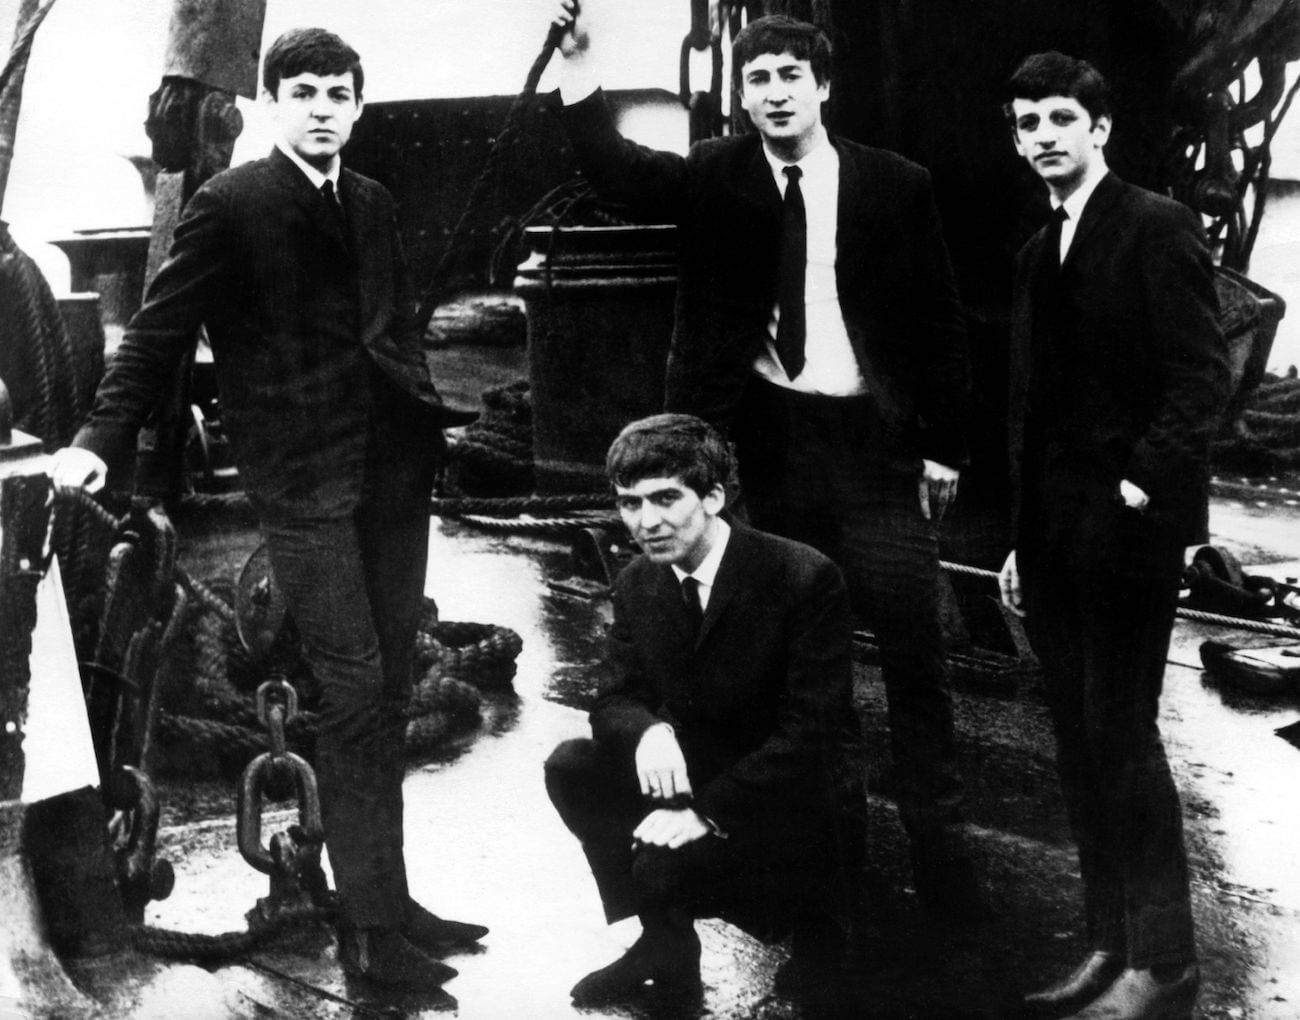 The Beatles wearing suits in around 1962.